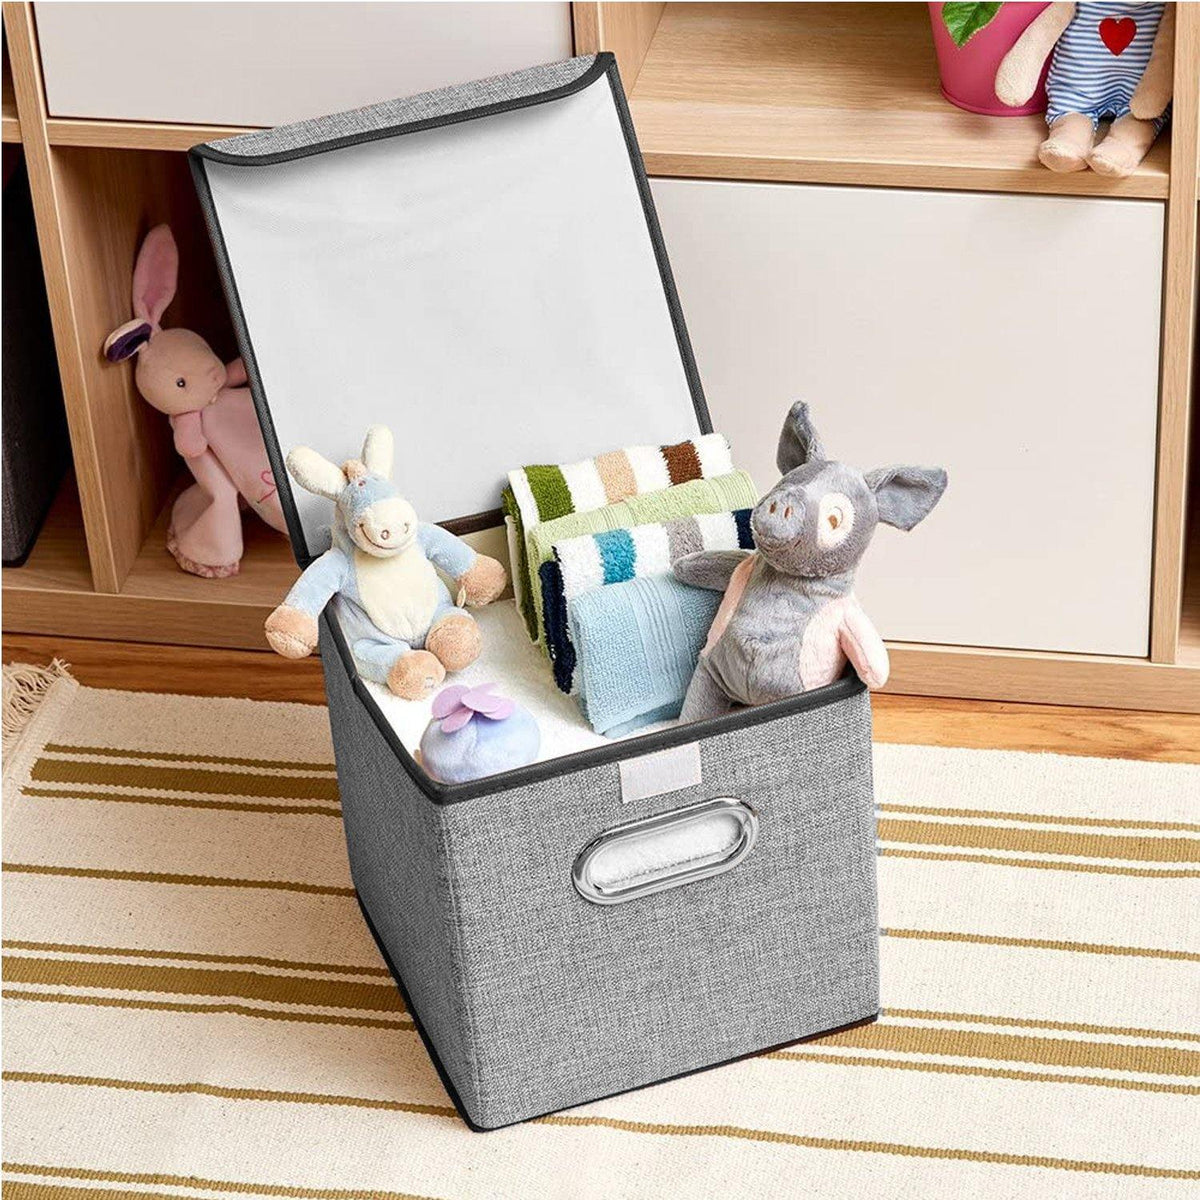 DOUBLE R BAGS Foldable Storage Bins Cube With Lid for Closet Organizer Small Grey - Double R Bags